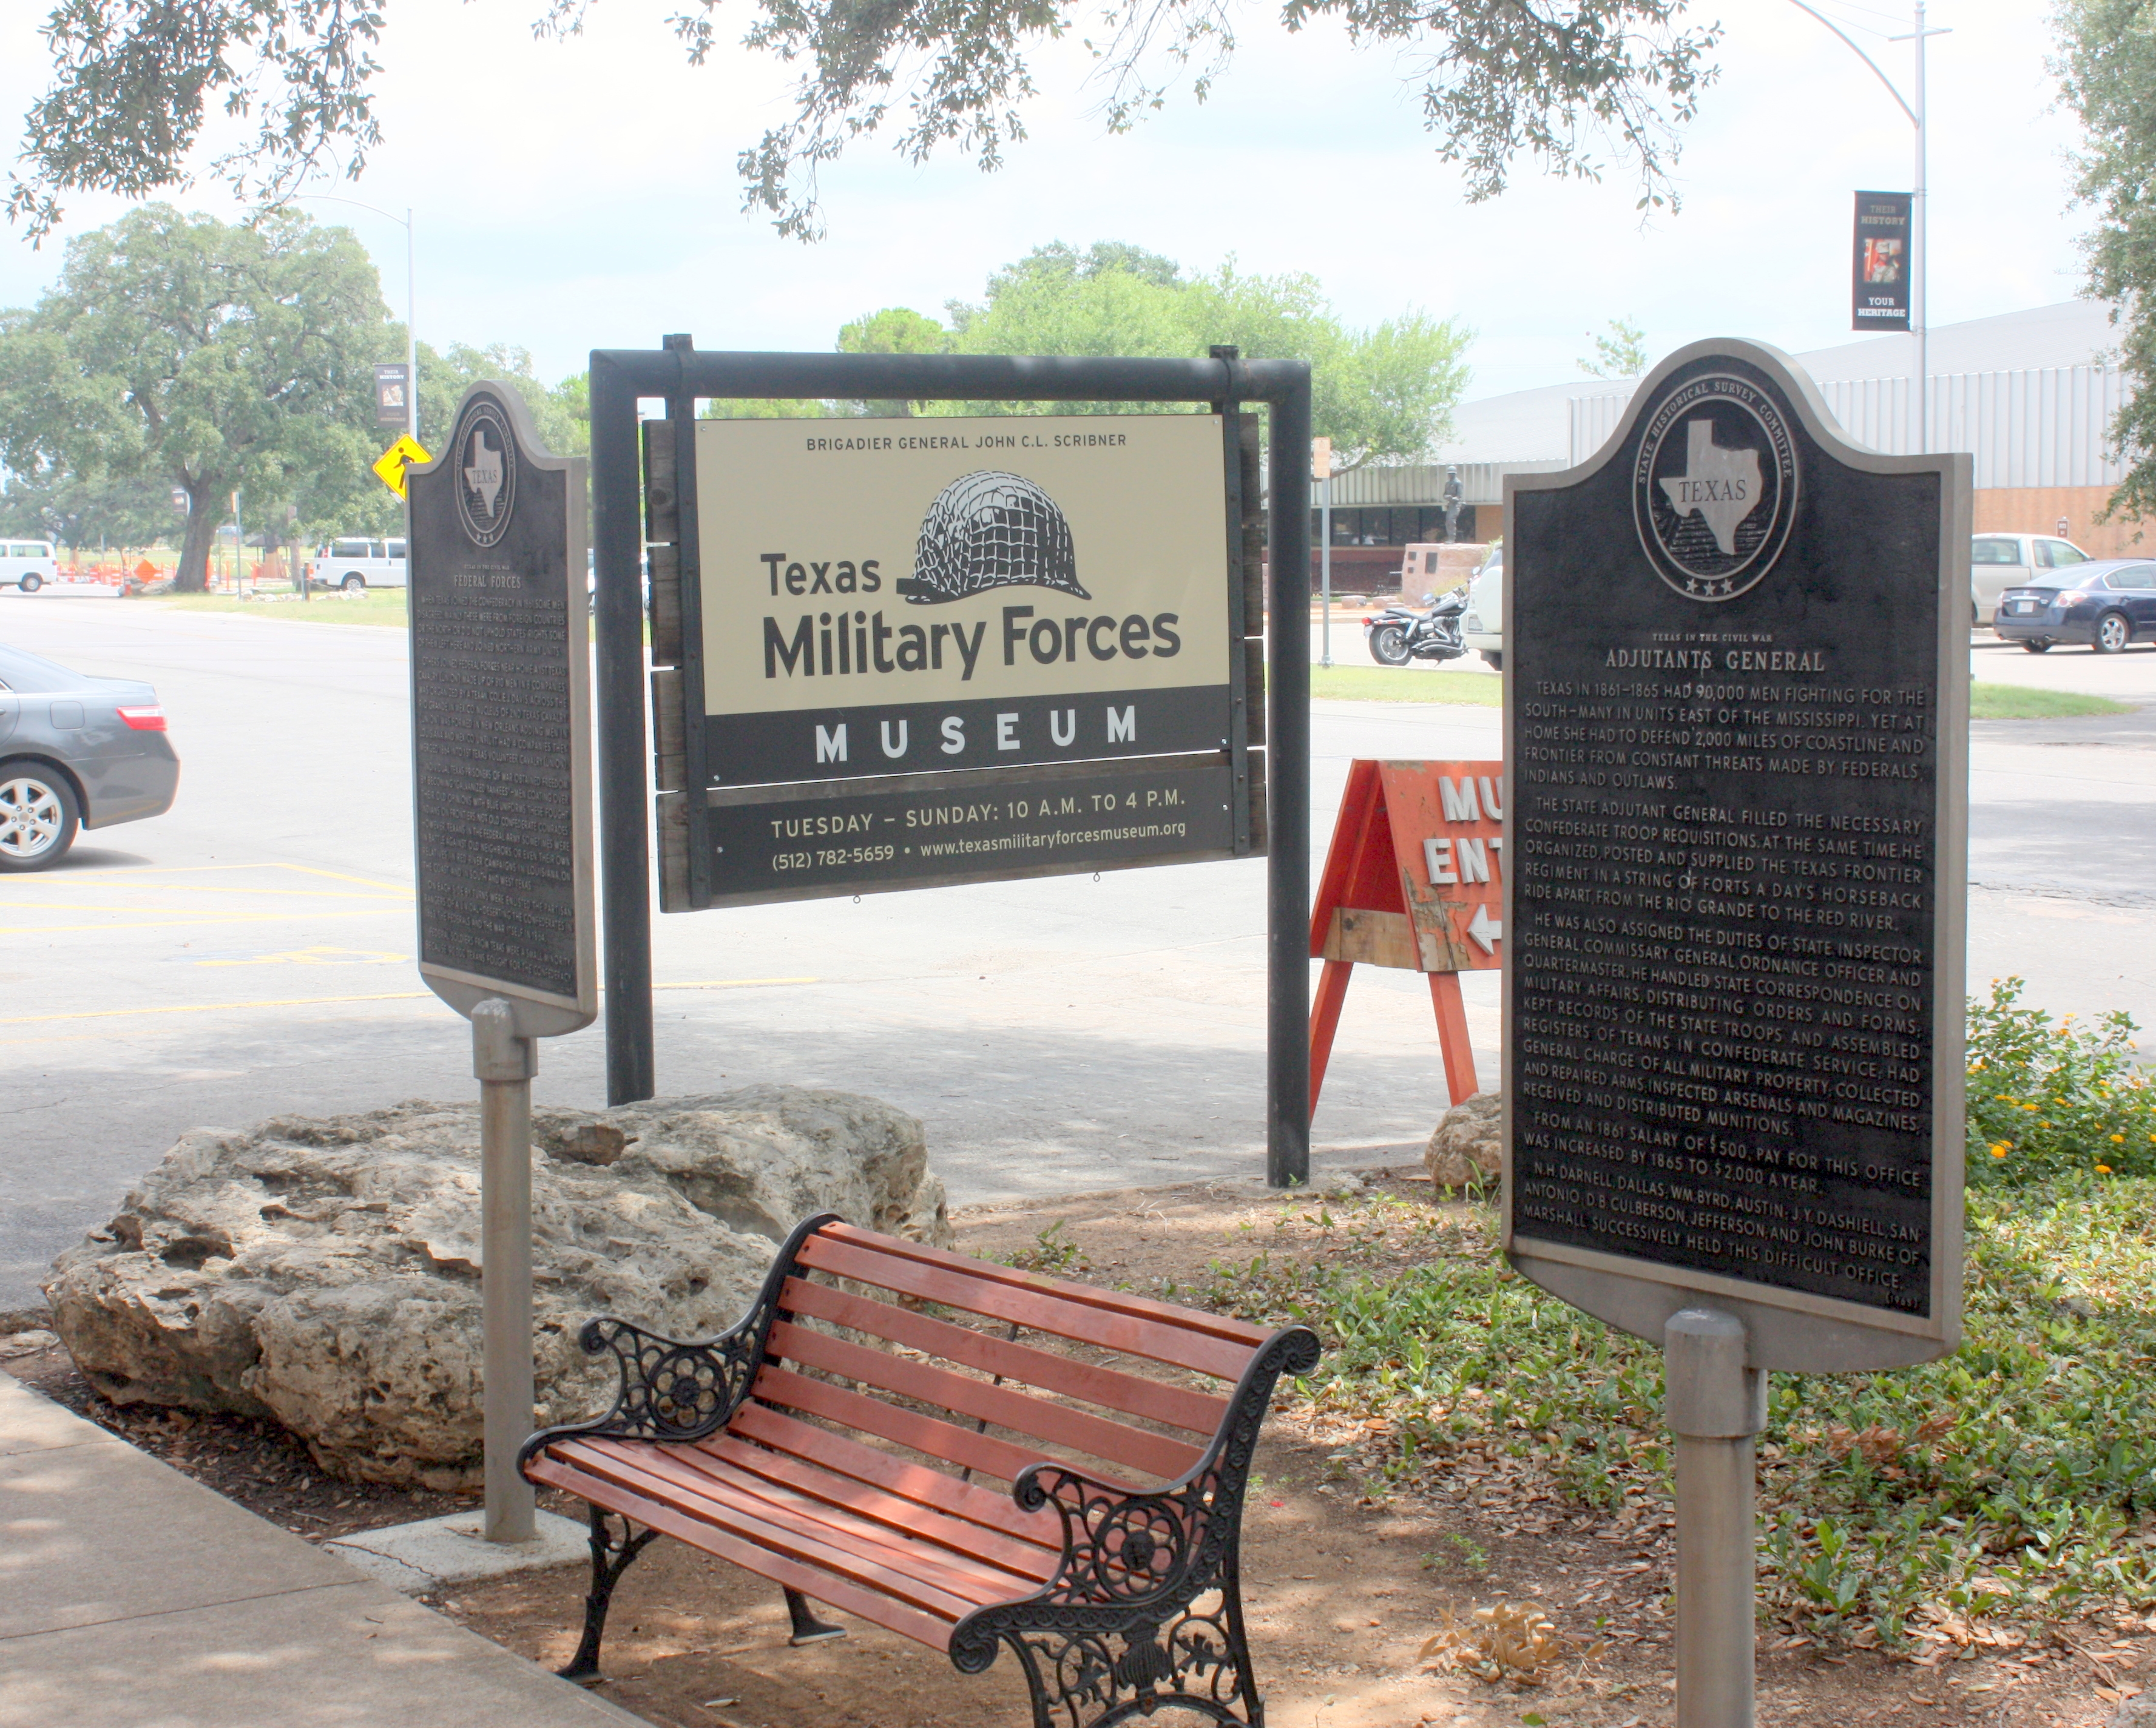 Texas in the Civil War – Federal Forces Marker, in front of the Texas Military Forces Museum